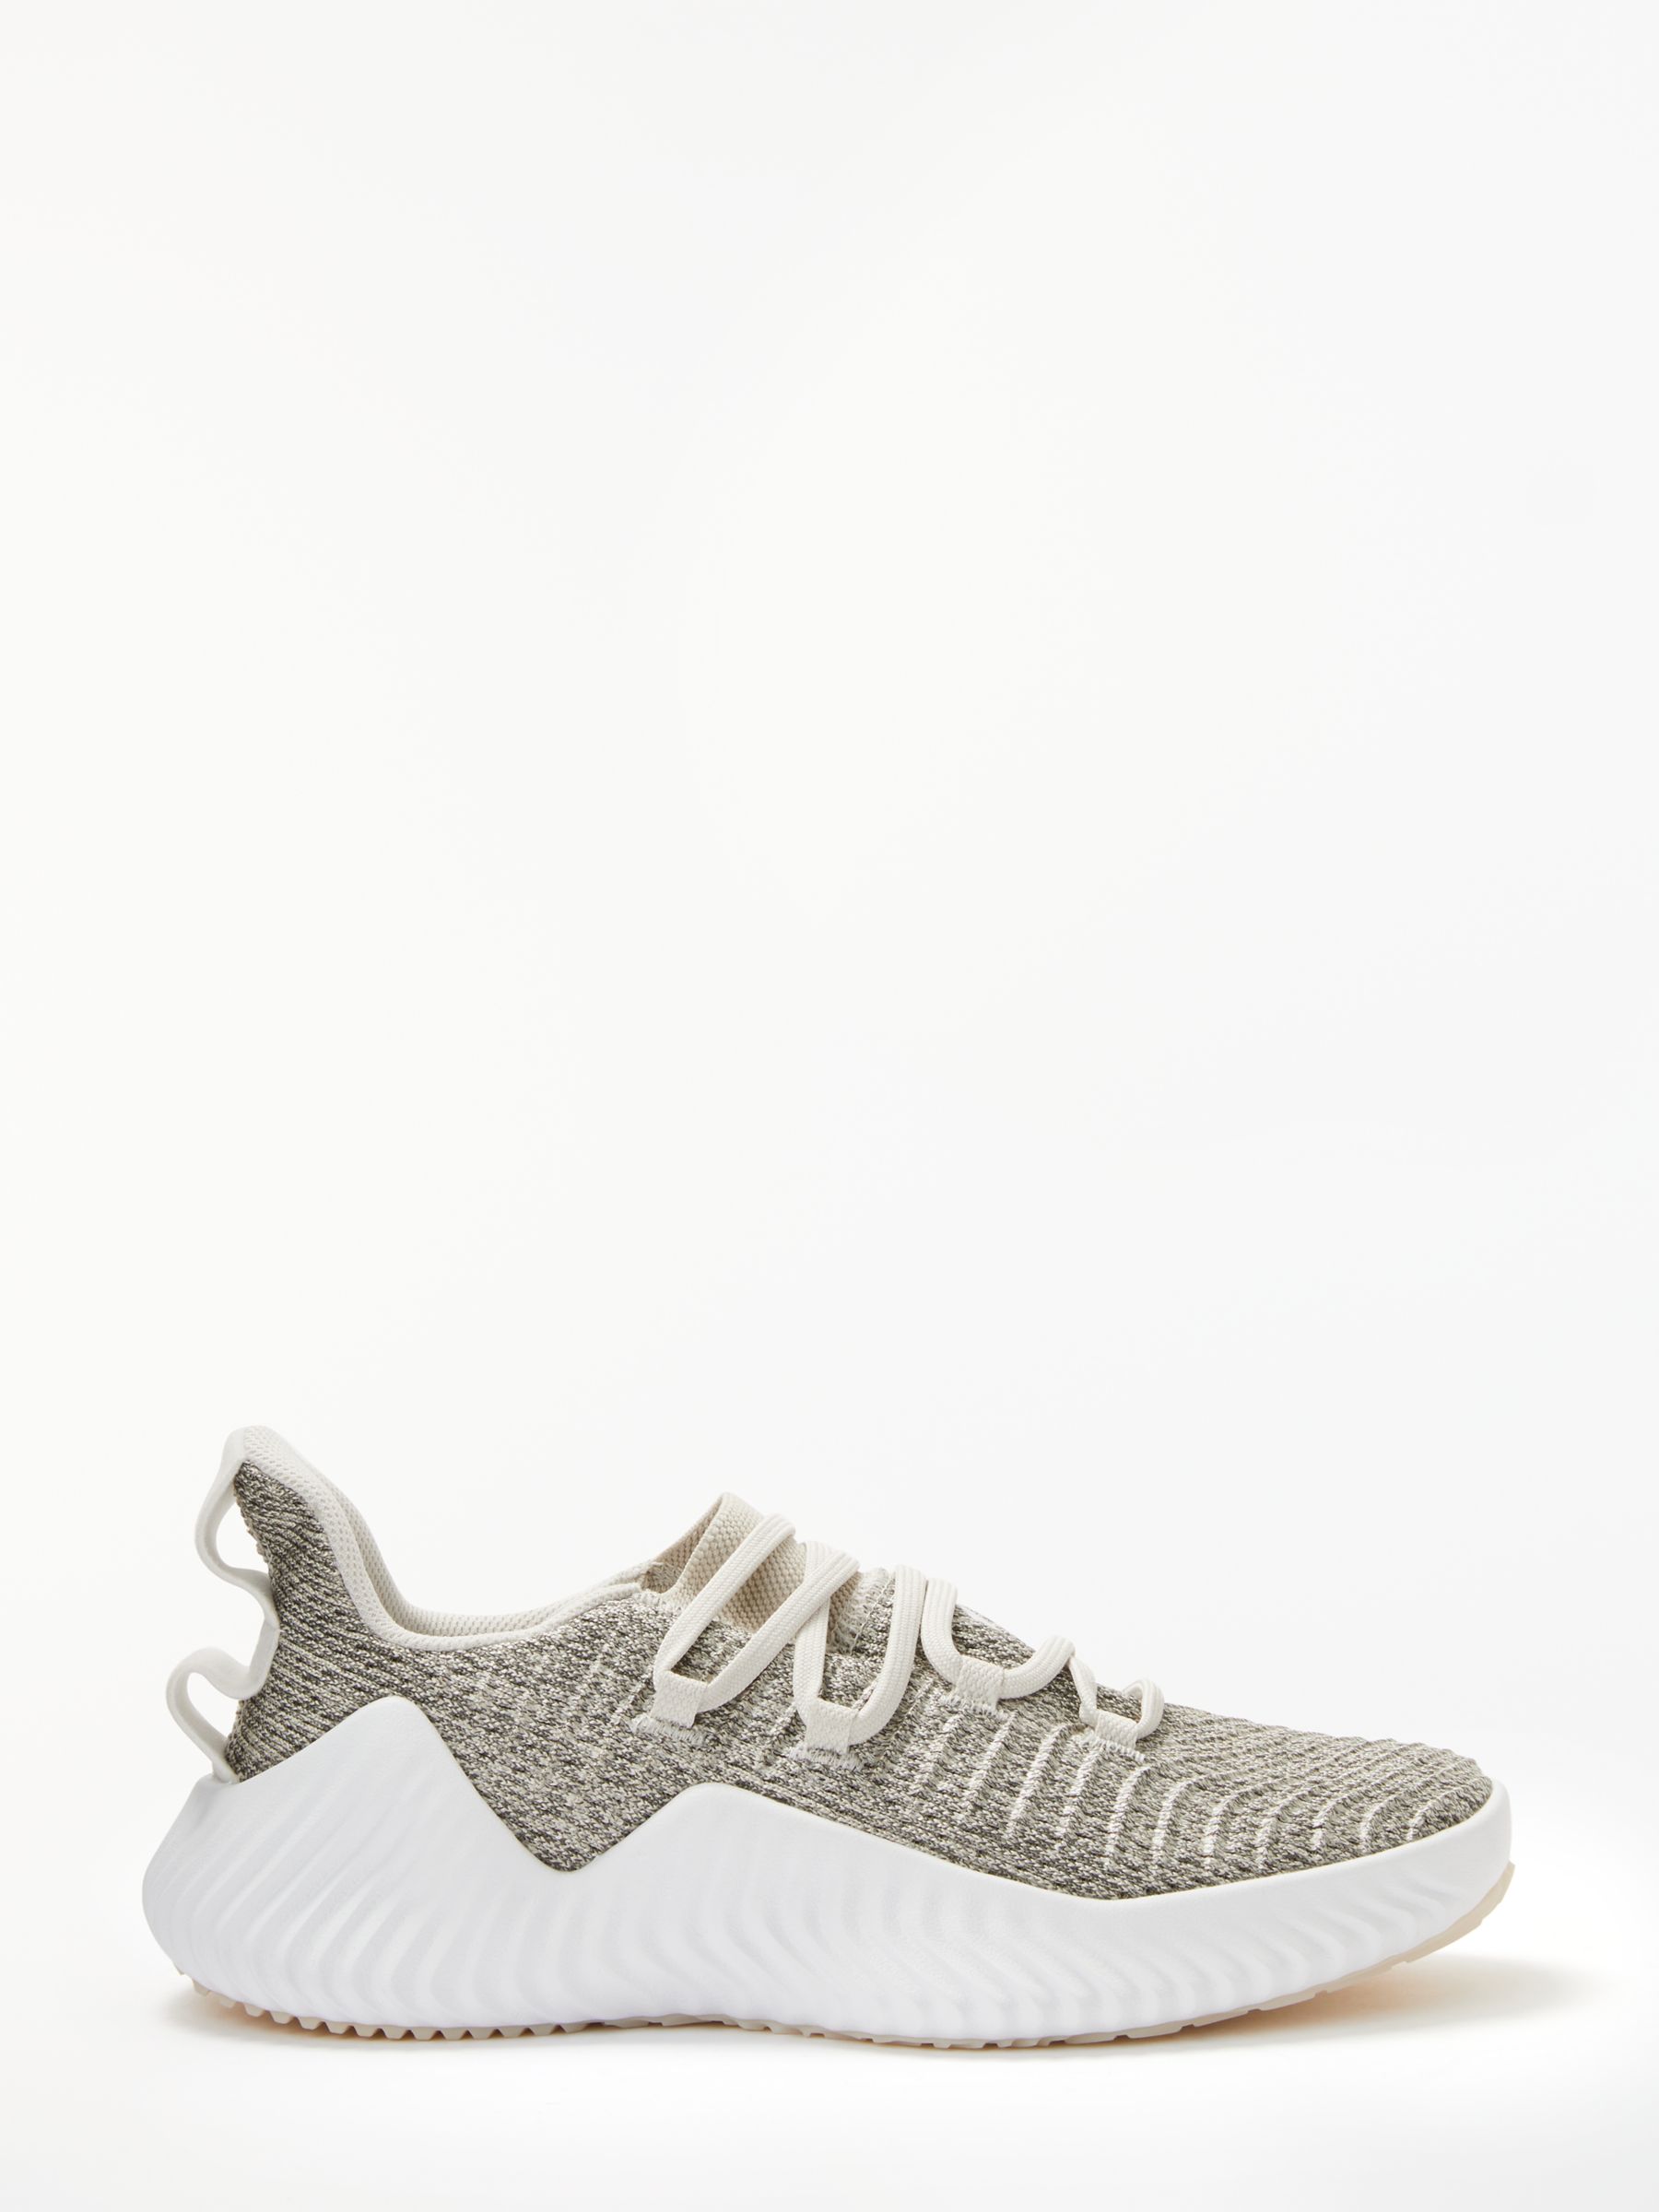 grey and white trainers womens